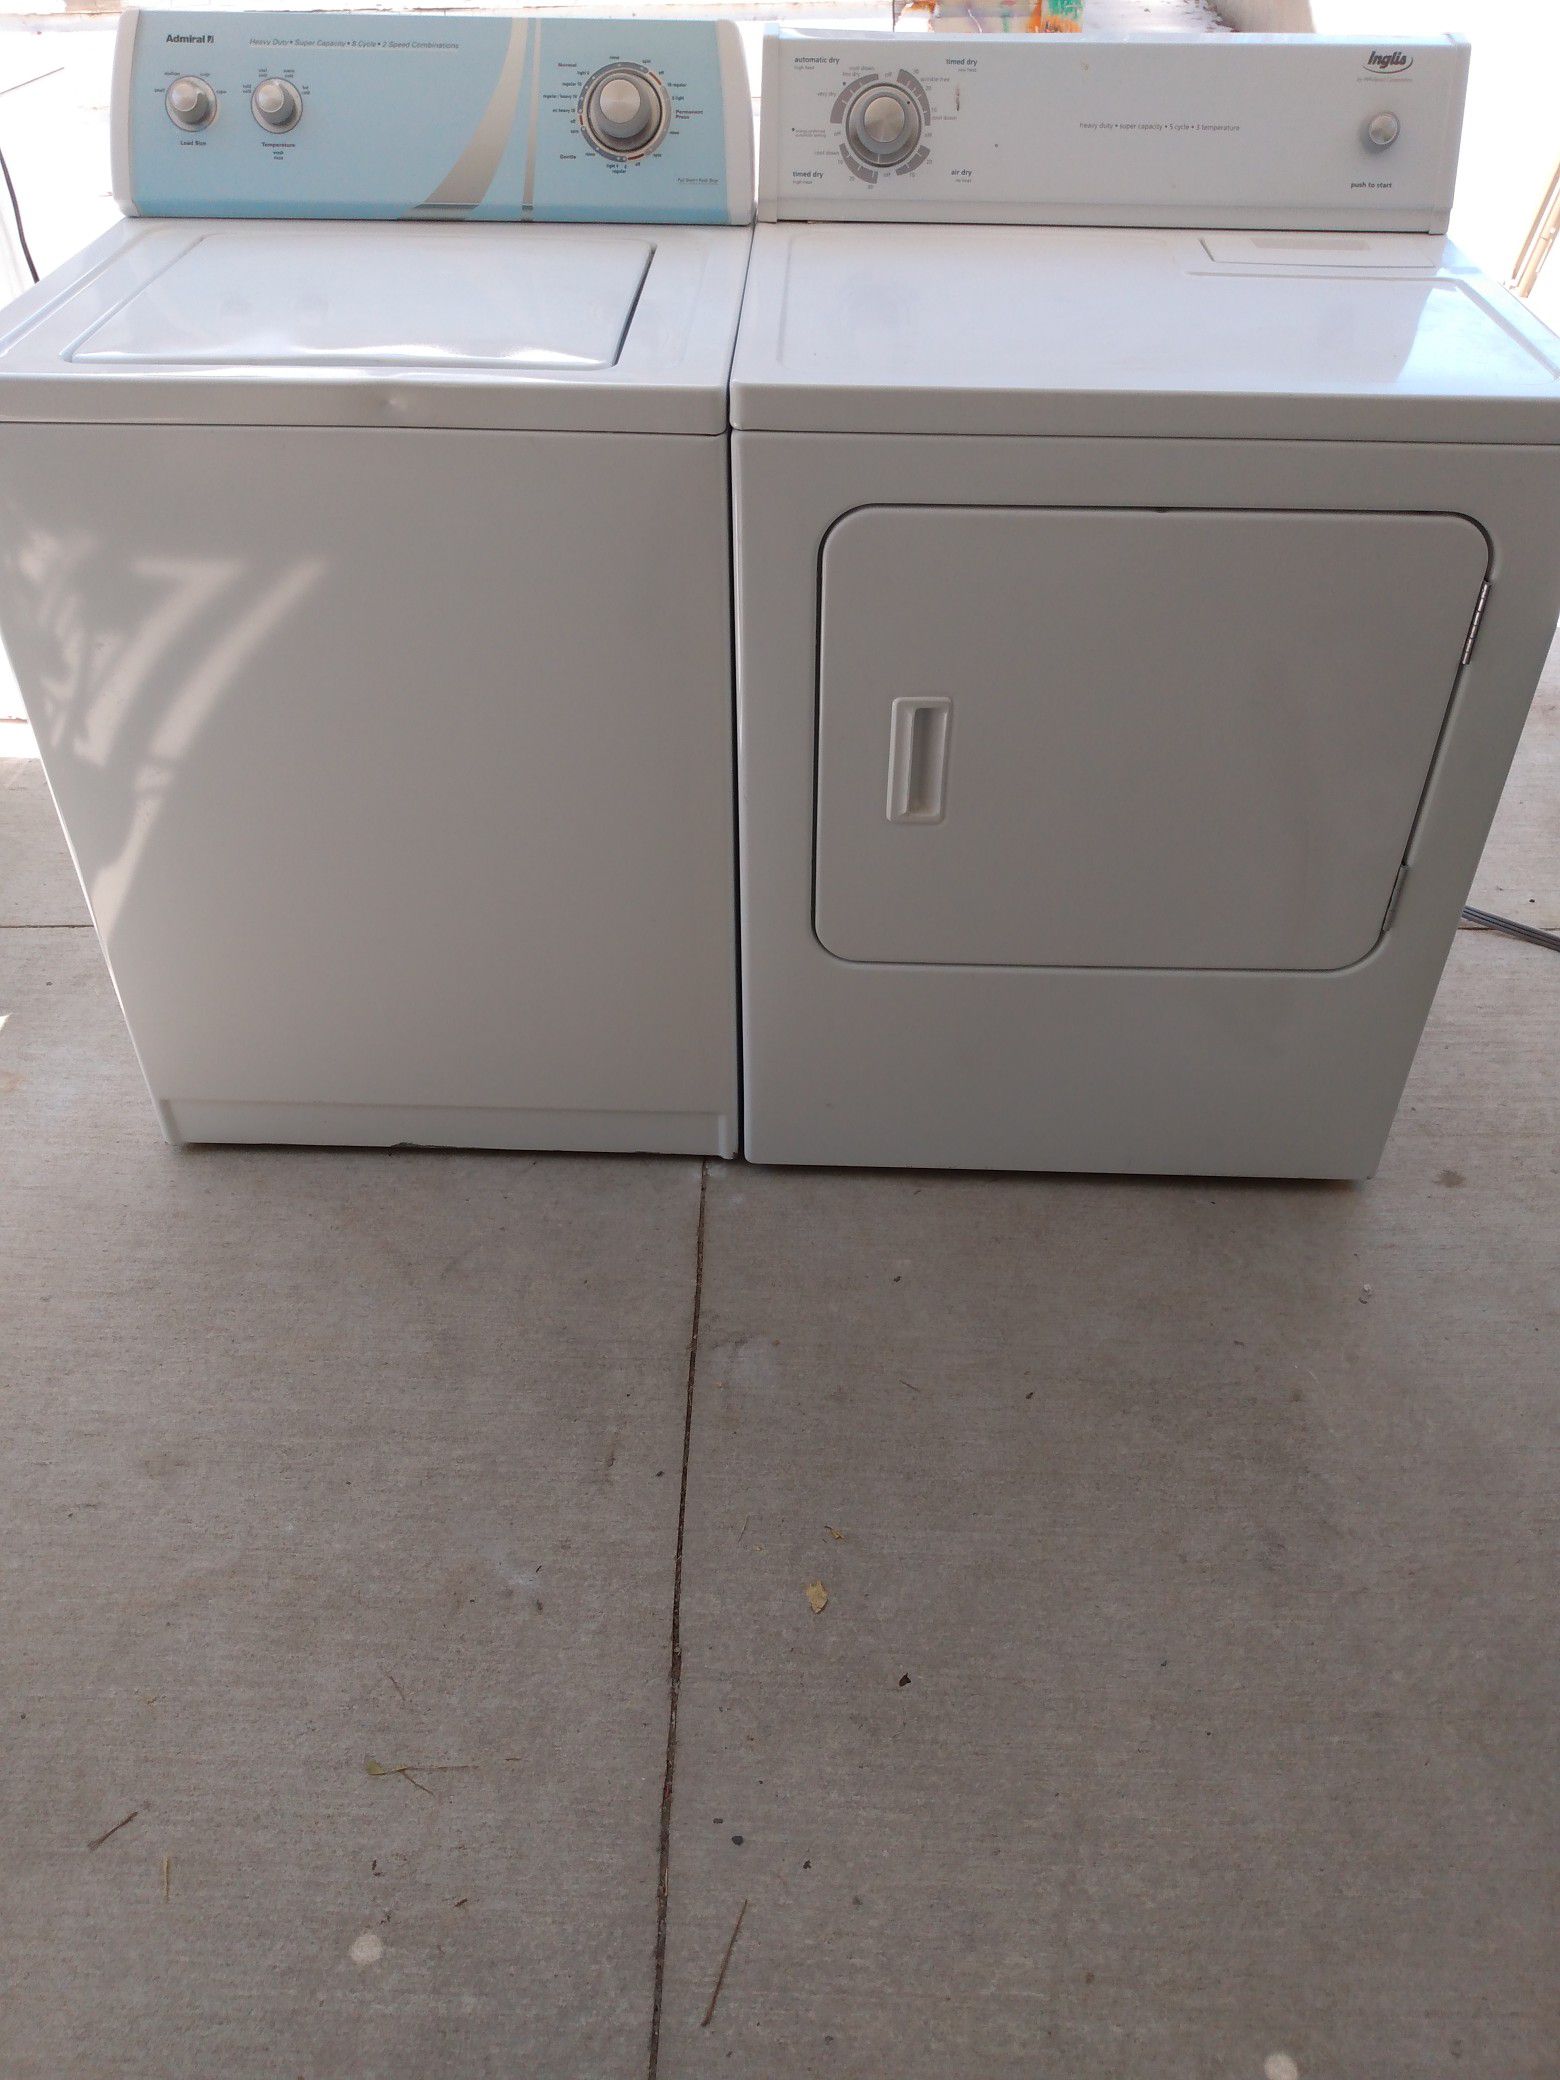 WASHER AND. DRYER. IN. EXCELLENT CONDITIONS. FREE. DELIVERY. IN. FORT WORTH. FIRST. FLOOR////////lavadora y secadora.